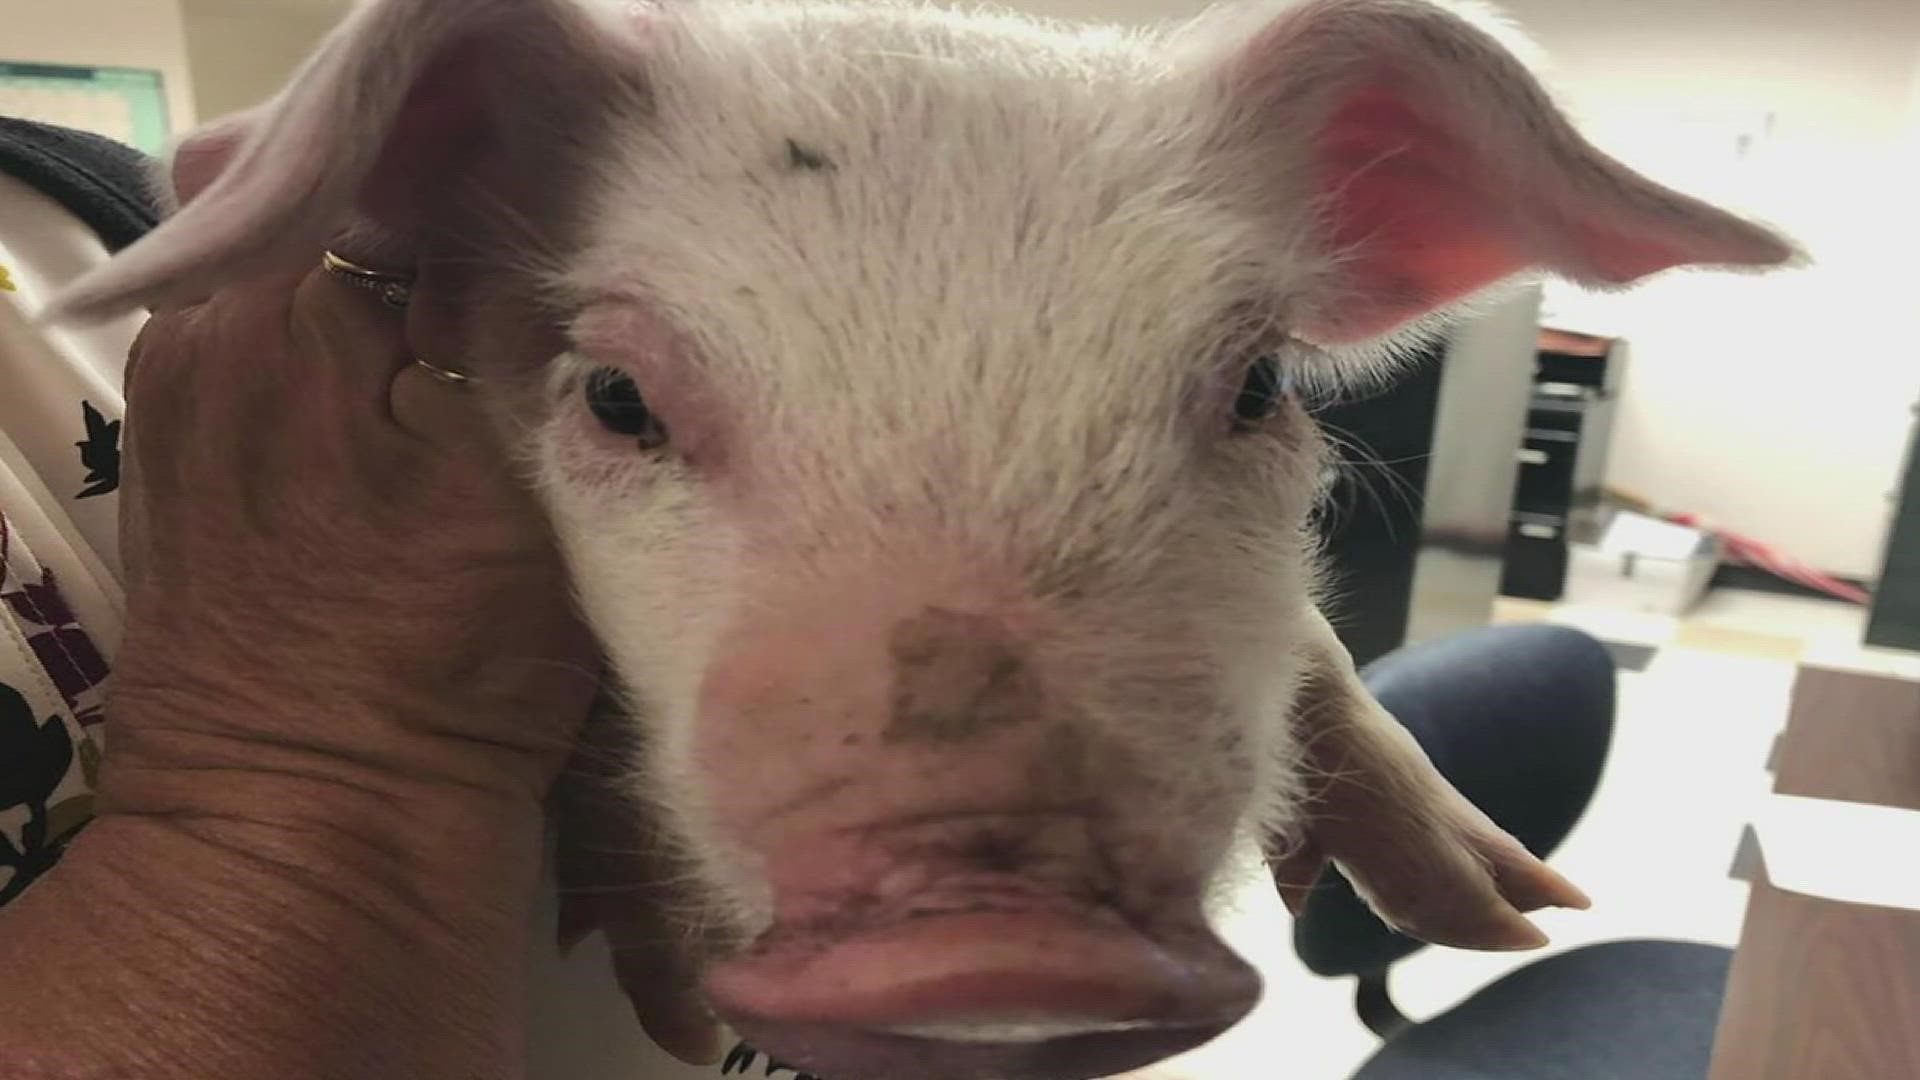 The Henry County Sheriff's Department rescued a piglet from the side of I-74 early Tuesday morning and it has been adopted by a Cambridge family.